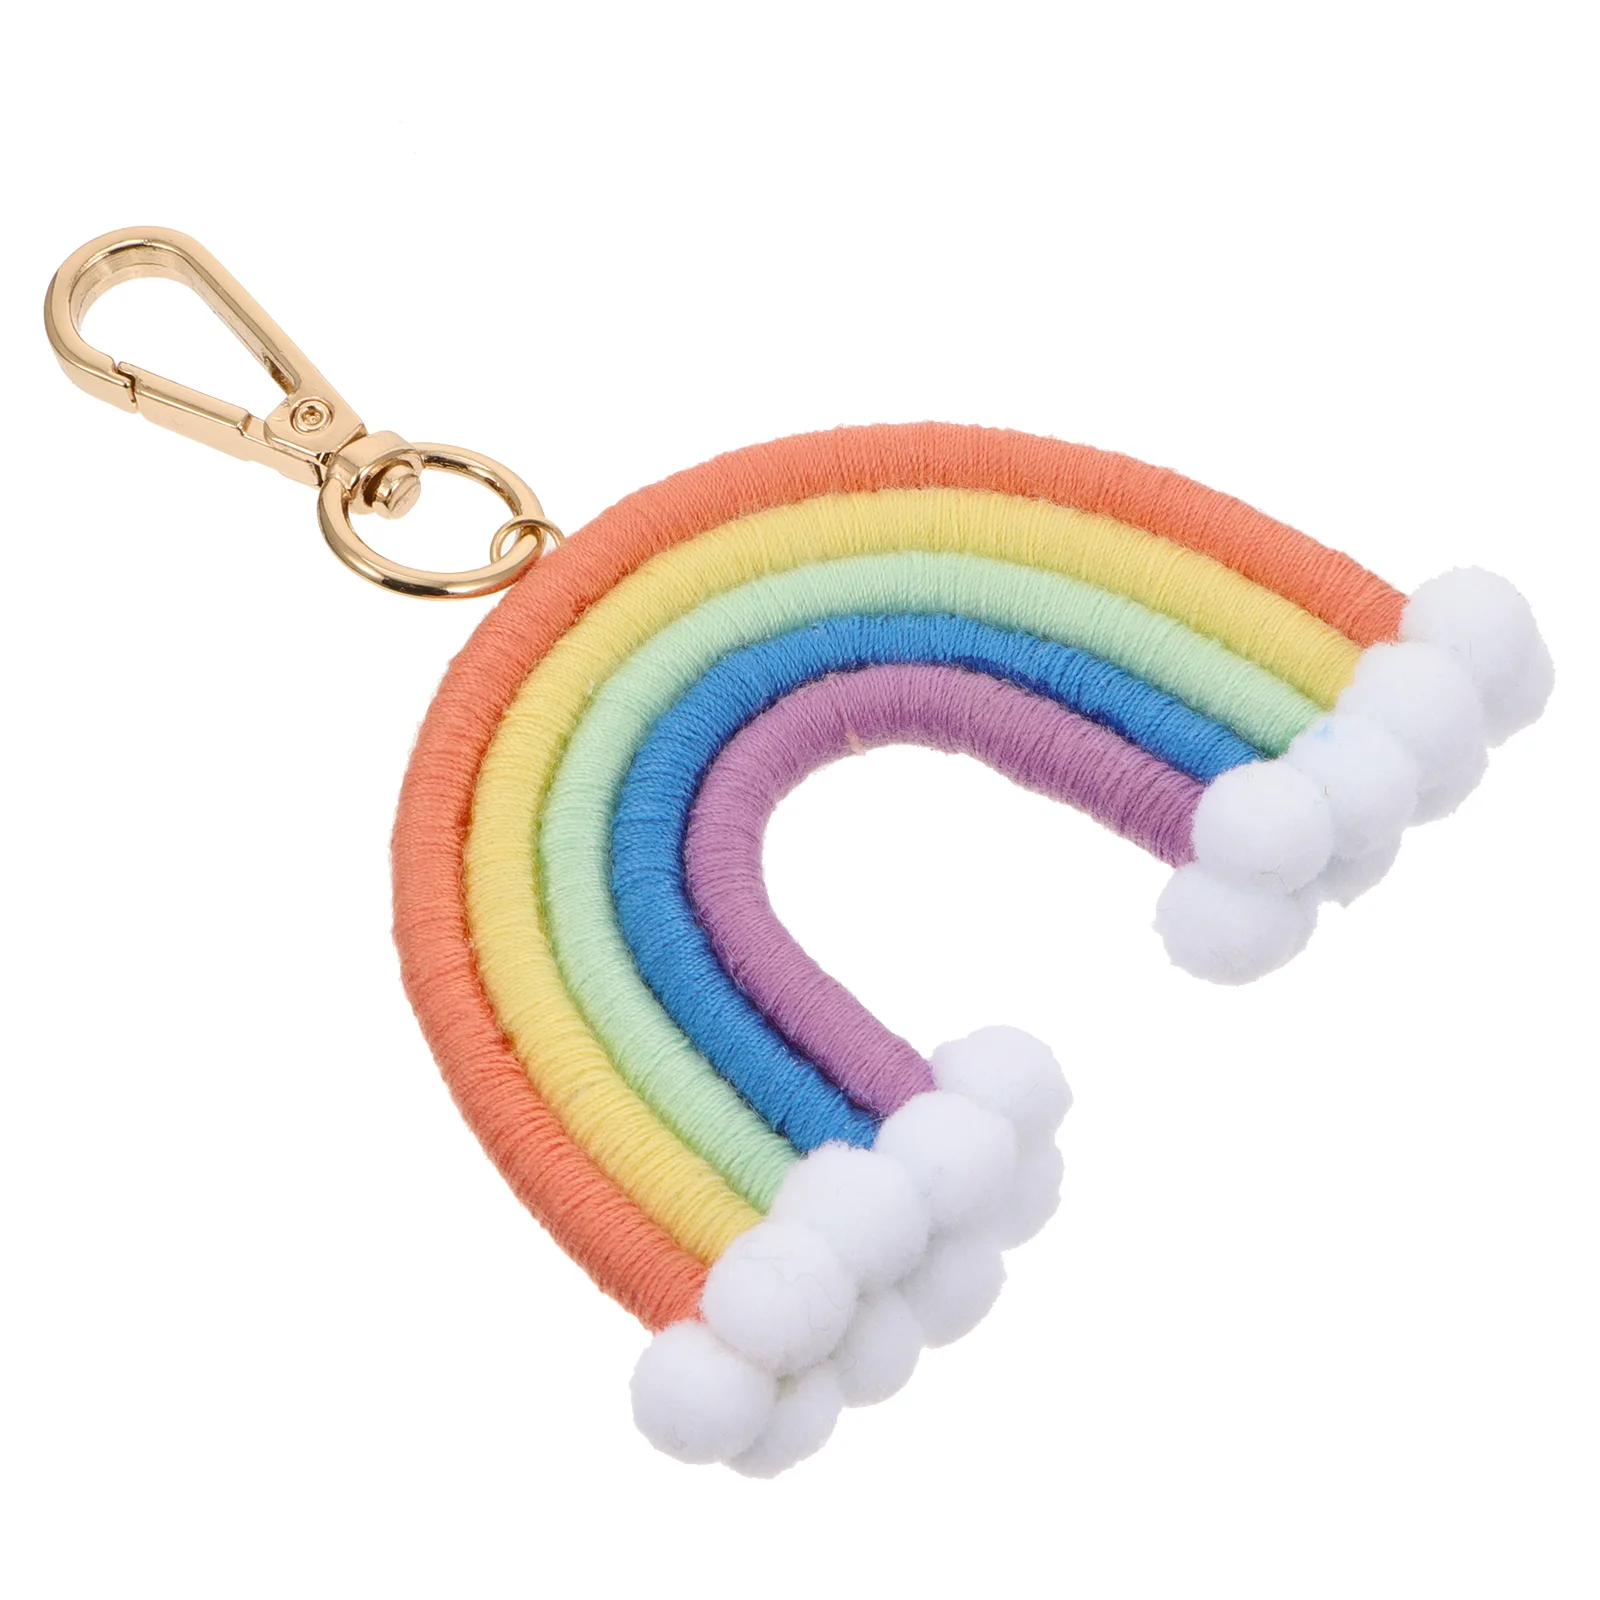 

Rainbow Keychain Key Pendant Keychains Macrame Pom Charm Woven Favors Party Tassel Ring Weaving Rope Ornament Hanging Novelty